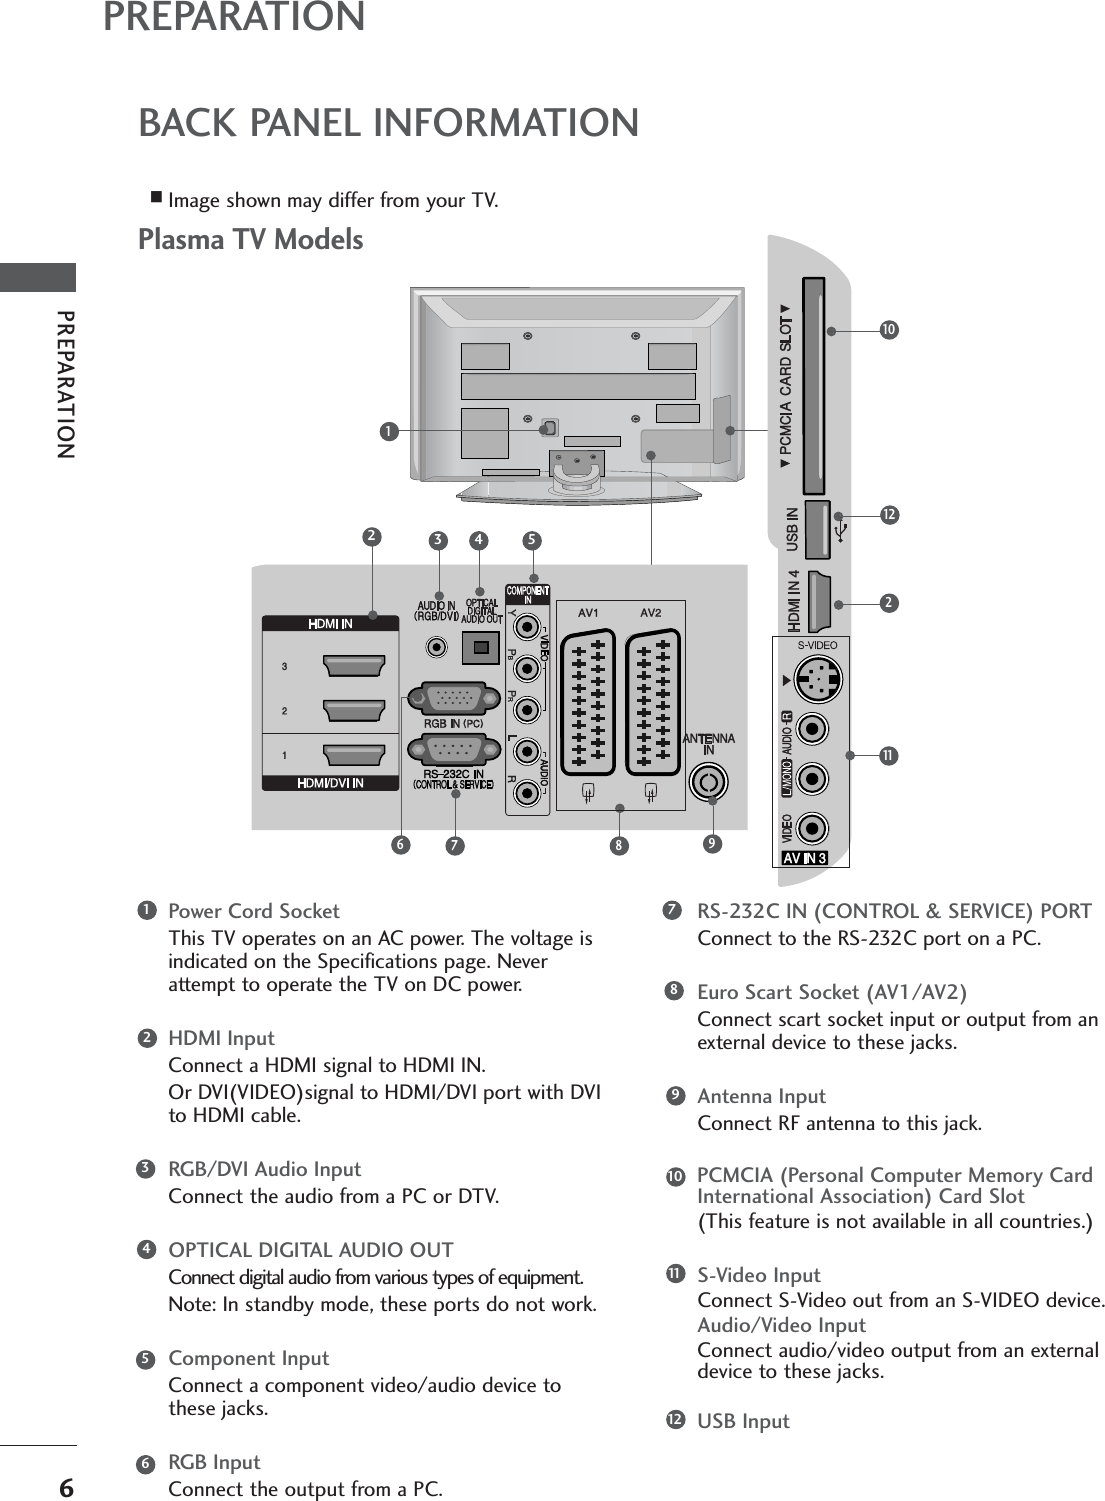 PREPARATION6PREPARATIONBACK PANEL INFORMATIONAImage shown may differ from your TV.Power Cord SocketThis TV operates on an AC power. The voltage isindicated on the Specifications page. Neverattempt to operate the TV on DC power.HDMI InputConnect a HDMI signal to HDMI IN.Or DVI(VIDEO)signal to HDMI/DVI port with DVIto HDMI cable.RGB/DVI Audio InputConnect the audio from a PC or DTV.OPTICAL DIGITAL AUDIO OUT Connect digital audio from various types of equipment. Note: In standby mode, these ports do not work.Component InputConnect a component video/audio device tothese jacks.RGB InputConnect the output from a PC.RS-232C IN (CONTROL &amp; SERVICE) PORTConnect to the RS-232C port on a PC.Euro Scart Socket (AV1/AV2) Connect scart socket input or output from anexternal device to these jacks.Antenna InputConnect RF antenna to this jack.PCMCIA (Personal Computer Memory CardInternational Association) Card Slot(This feature is not available in all countries.)S-Video InputConnect S-Video out from an S-VIDEO device.Audio/Video InputConnect audio/video output from an externaldevice to these jacks.USB Input123478910111215623 4 567 8 9Plasma TV Models 1012211